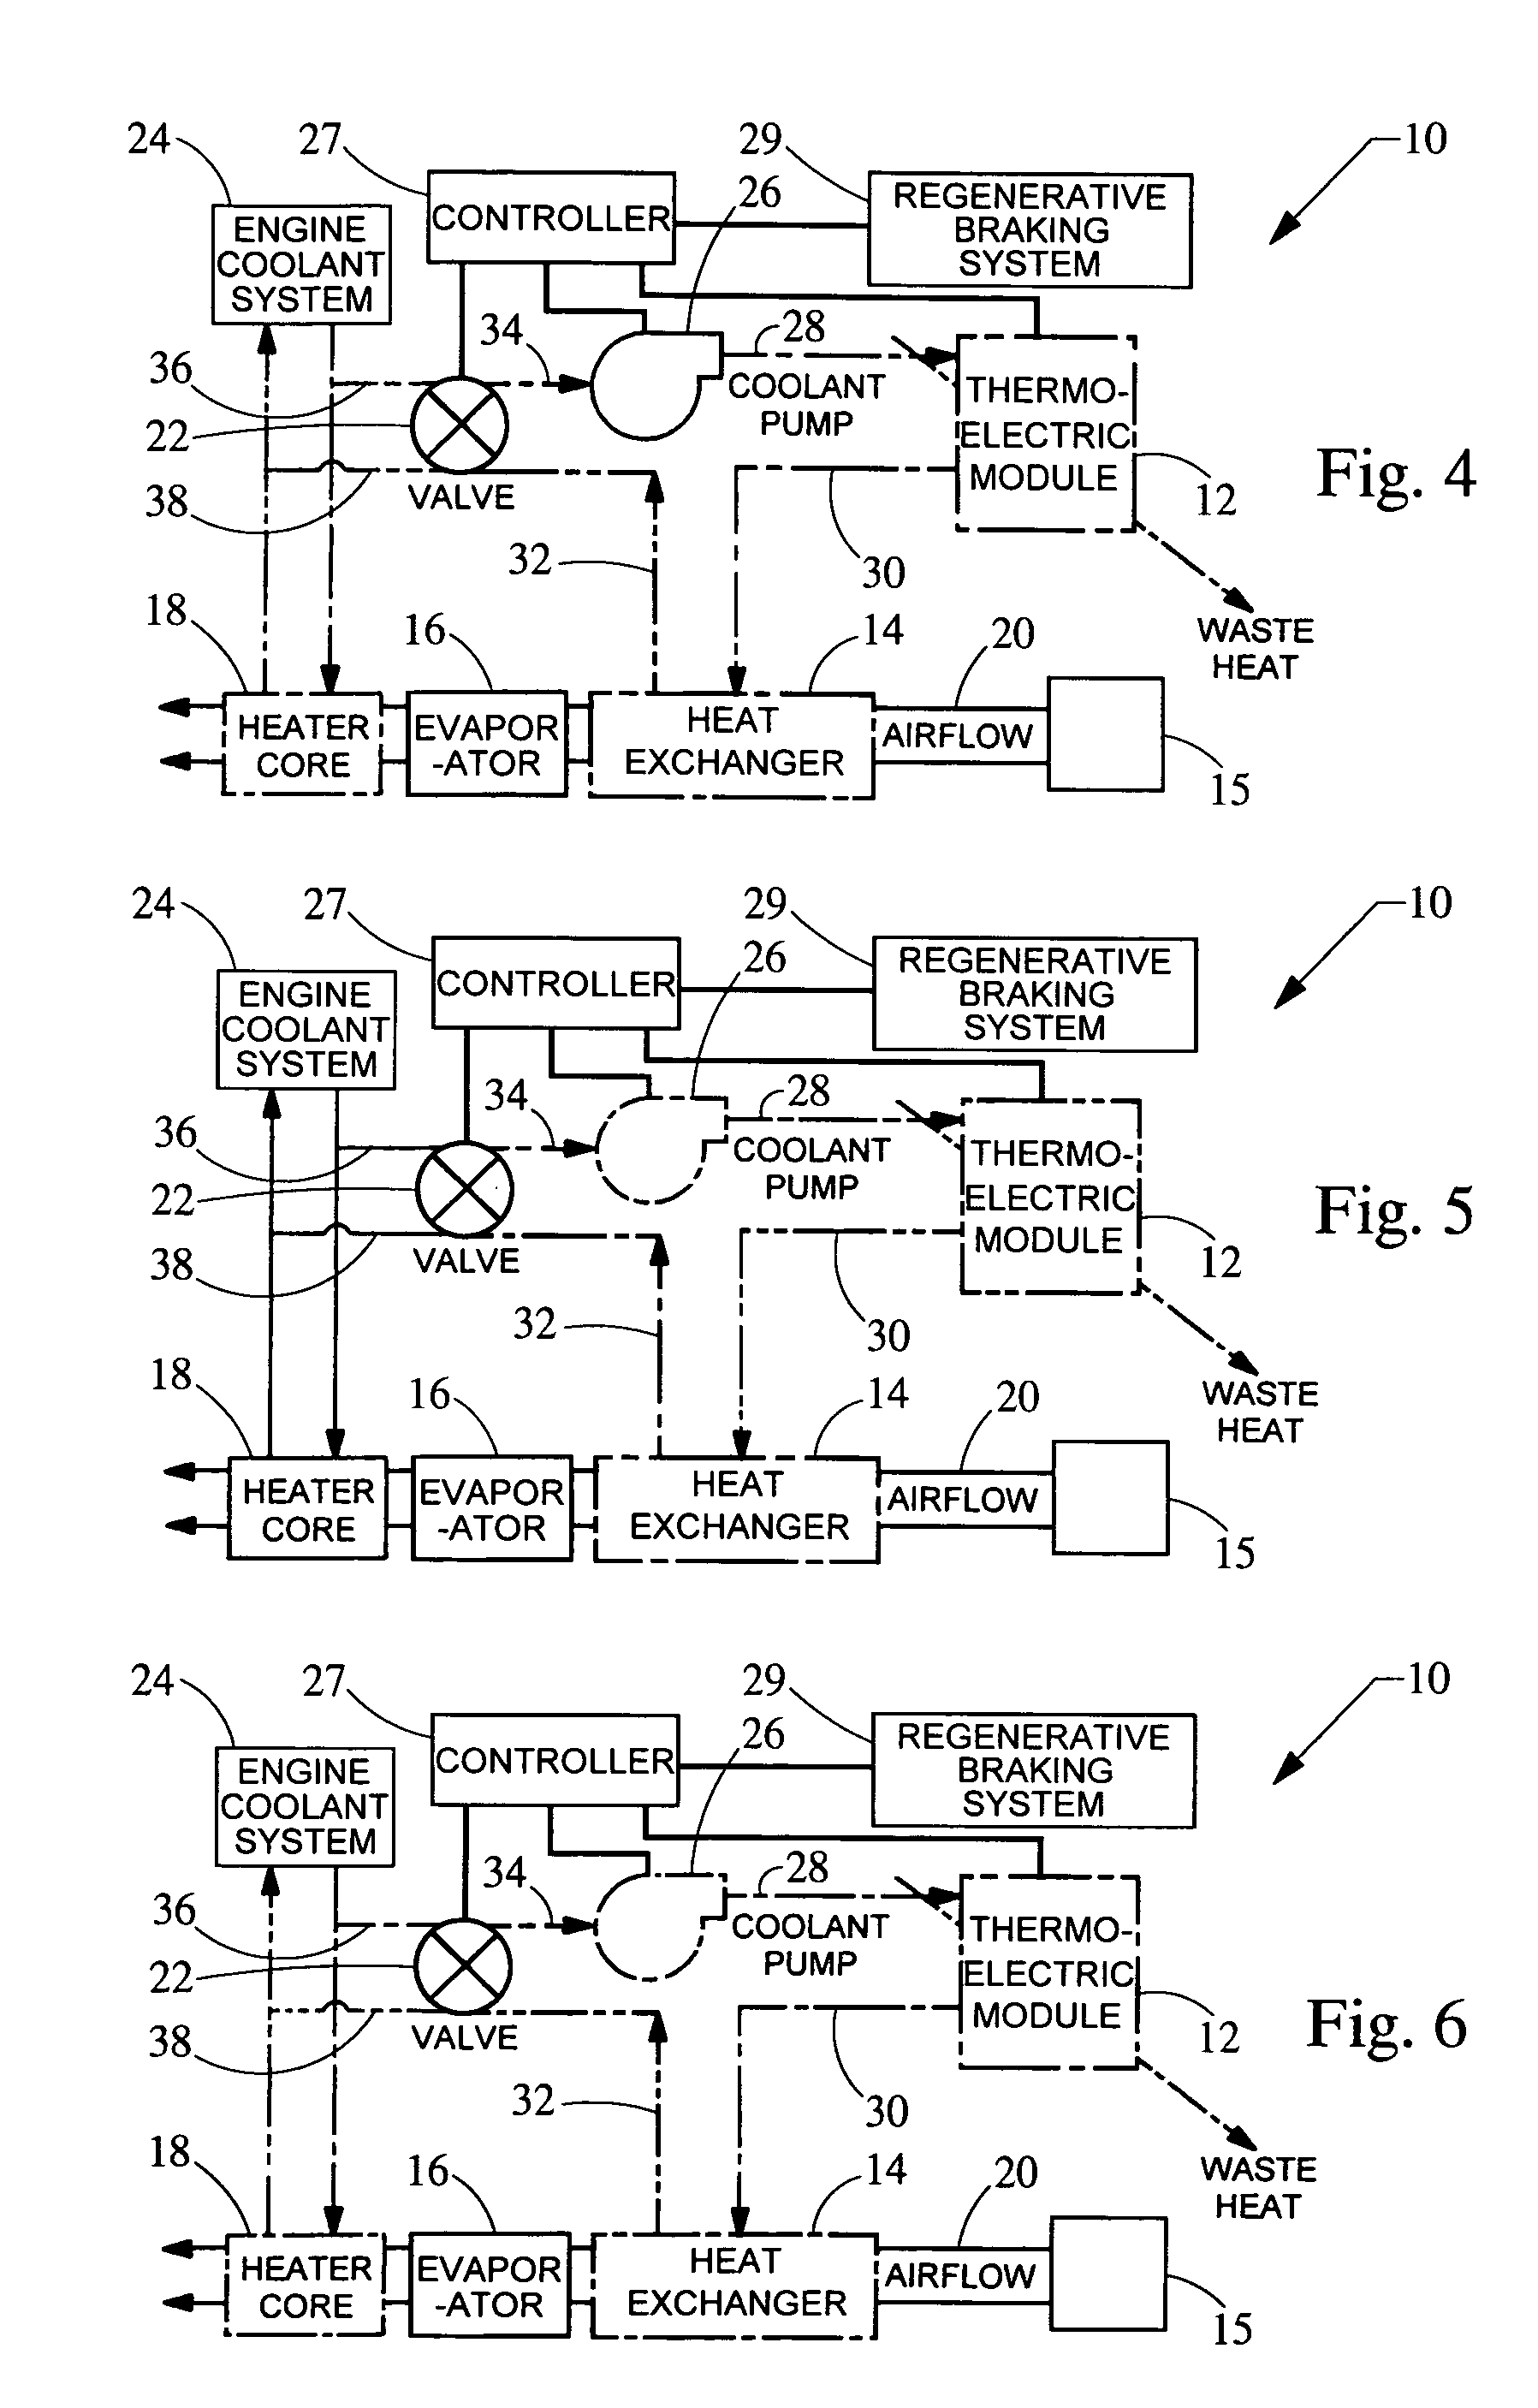 Climate control system for hybrid vehicles using thermoelectric devices